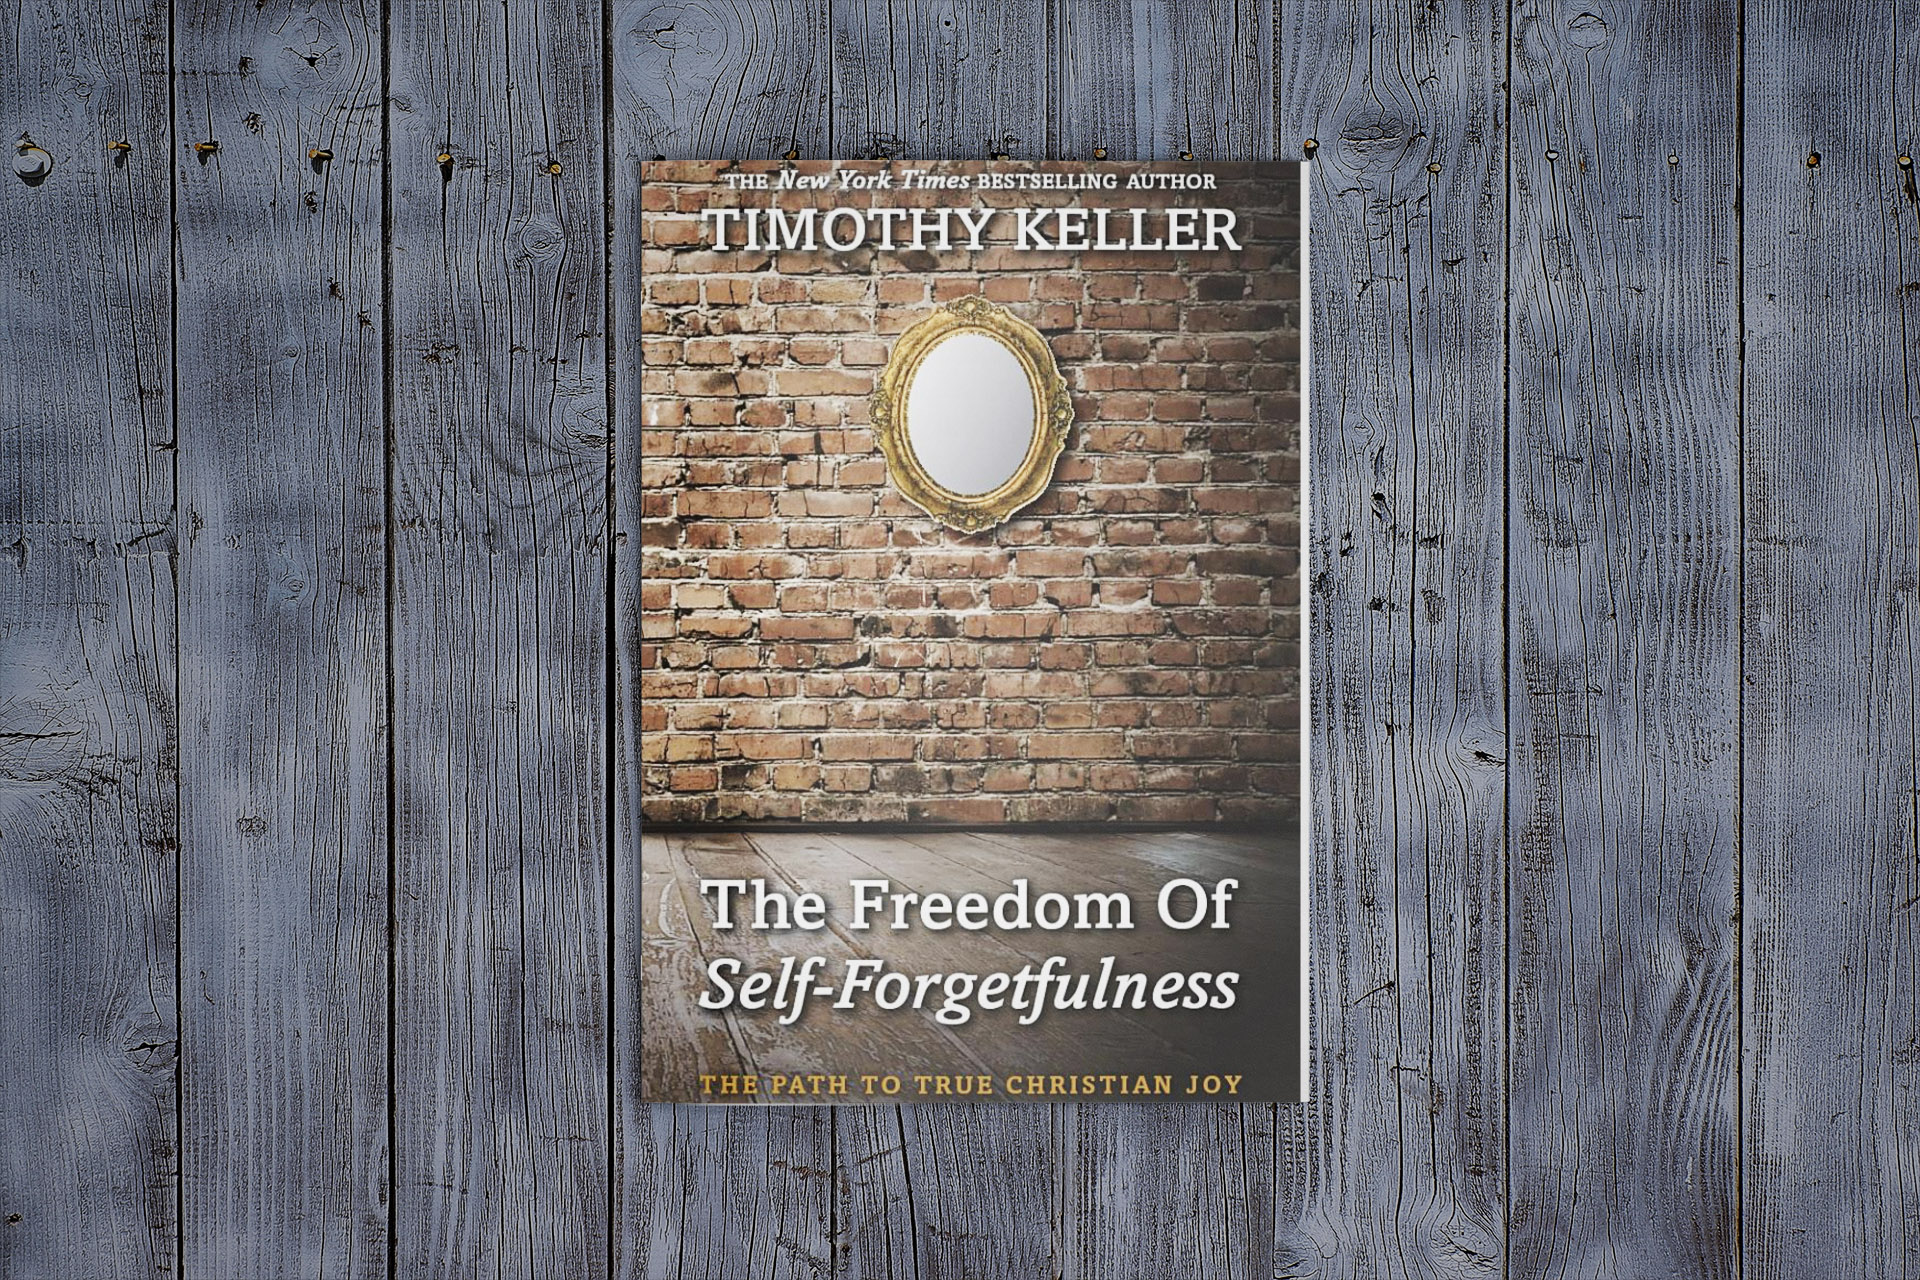 Review: Tim Keller, The Freedom of Self-Forgetfulness